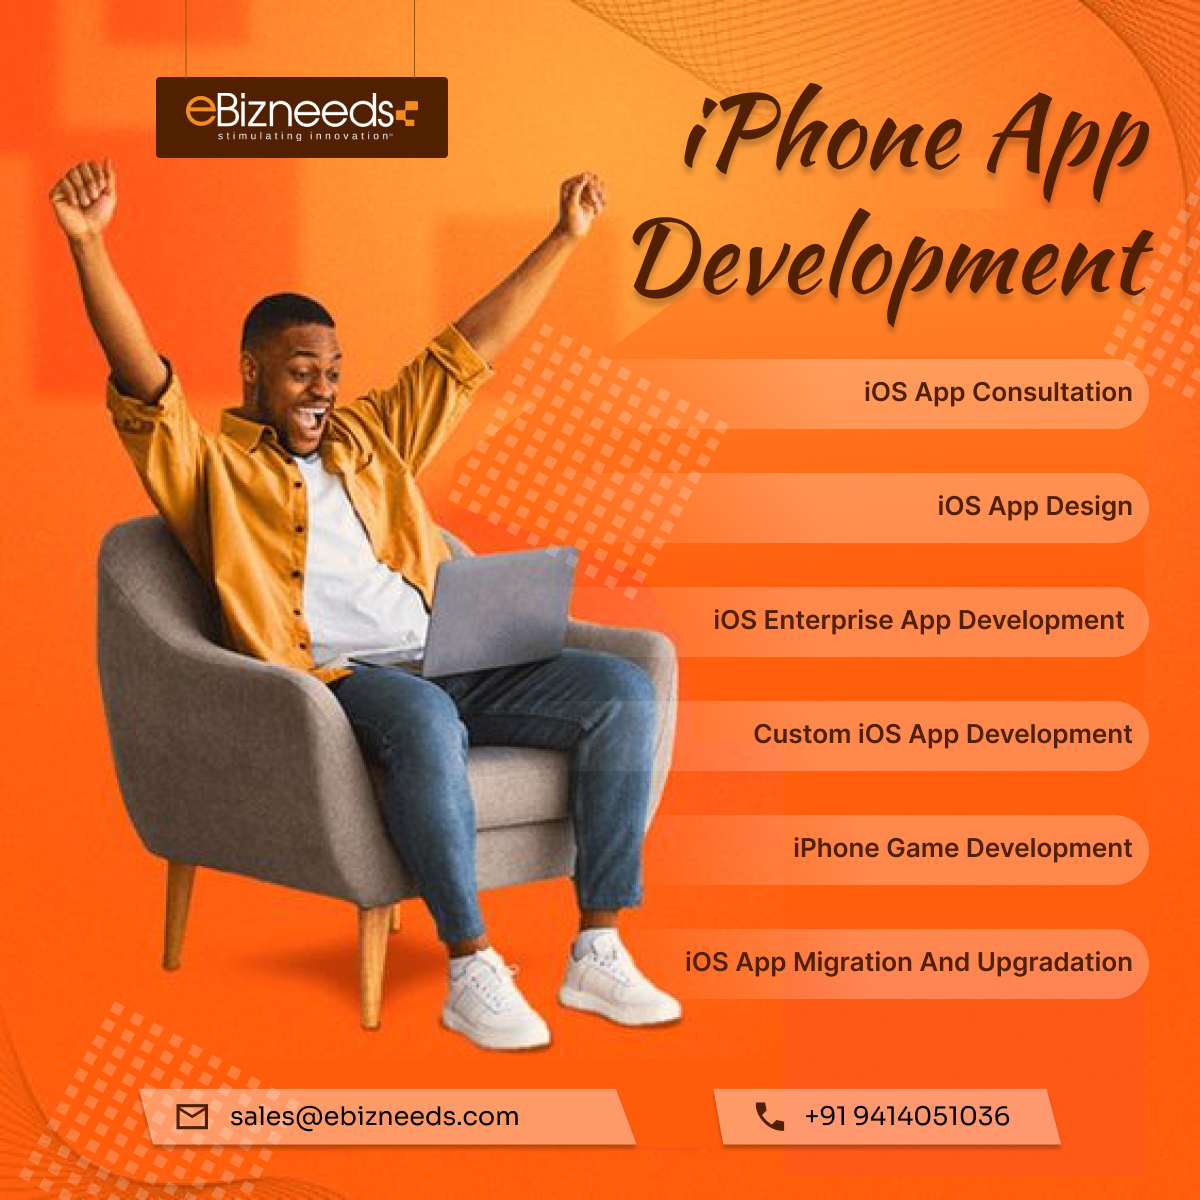 At 𝐞𝐁𝐢𝐳𝐧𝐞𝐞𝐝𝐬, we're diving into the world of iPhone app development with unparalleled enthusiasm and innovation!

#iosappdevelopment #innovationunleashed #techmasters #userexperience #nextgenapps #appdevteam #techsquad #swiftprogramming
#iosdevelopment #developer